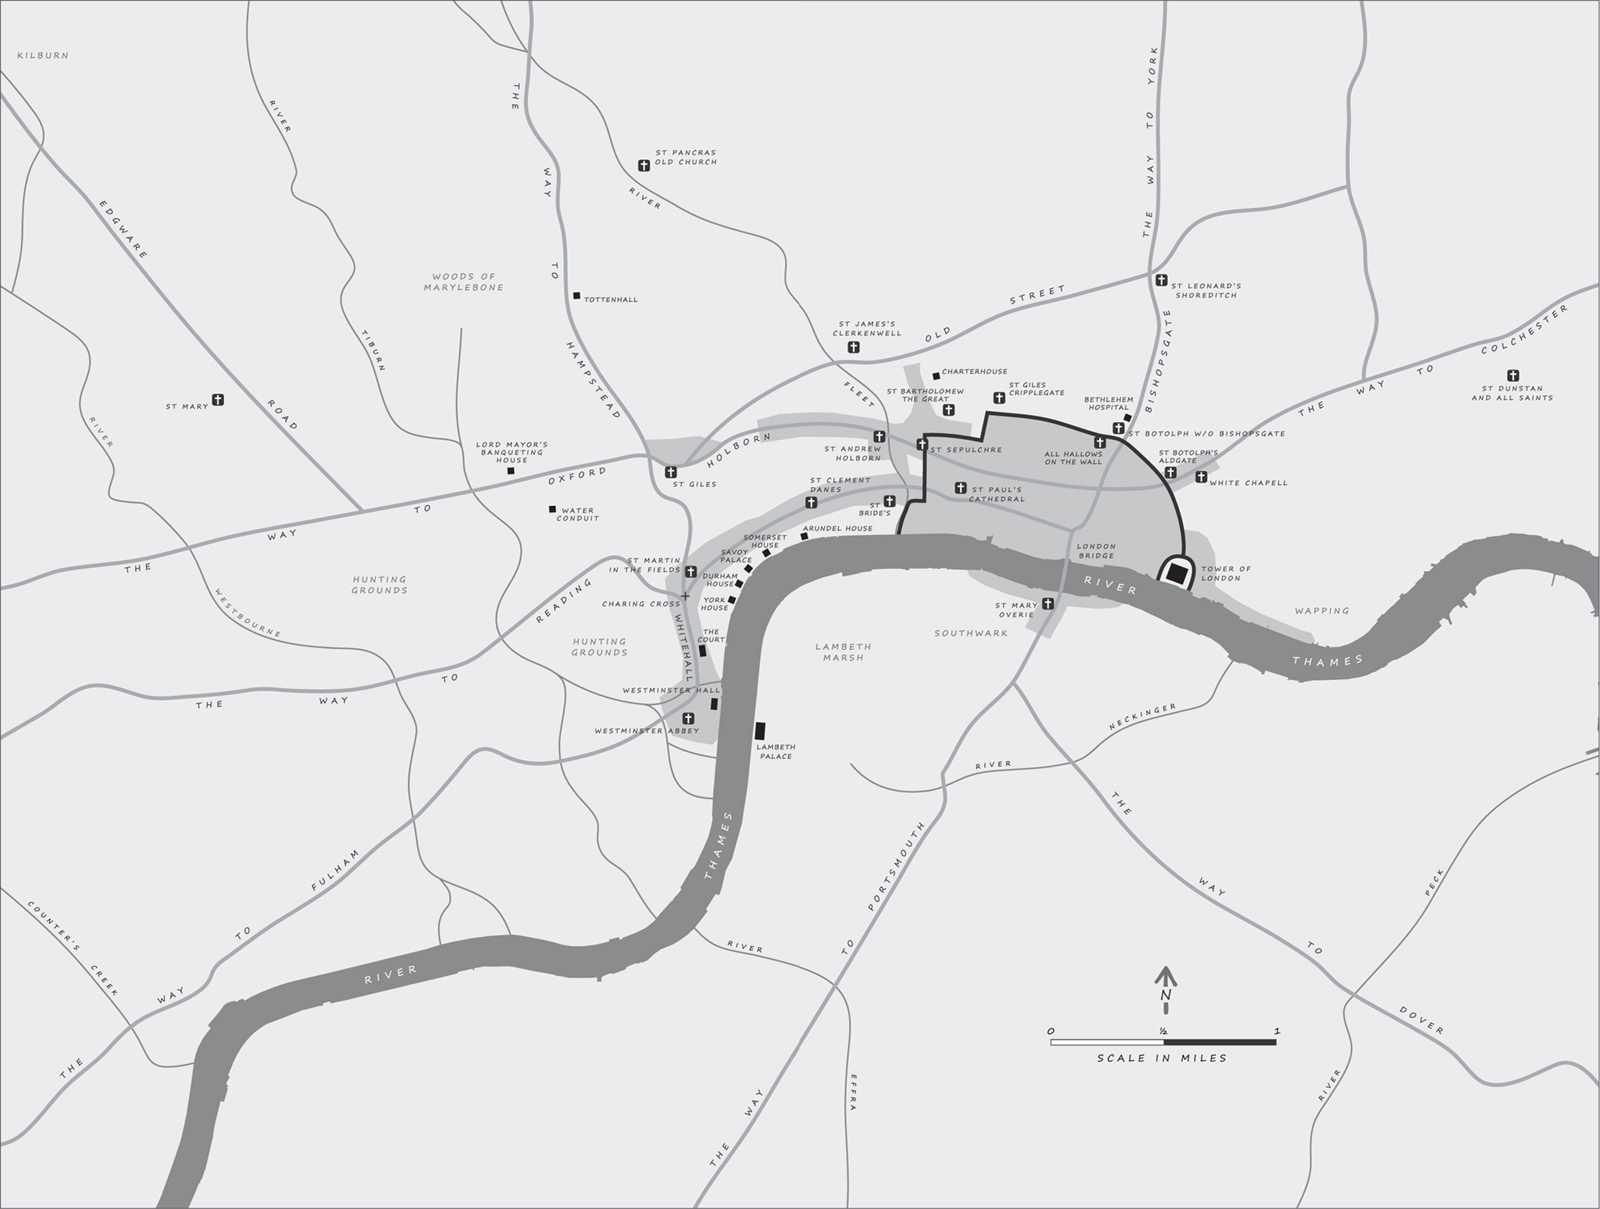 London c 1550 The significantly built-up area is shown in darker grey - photo 3